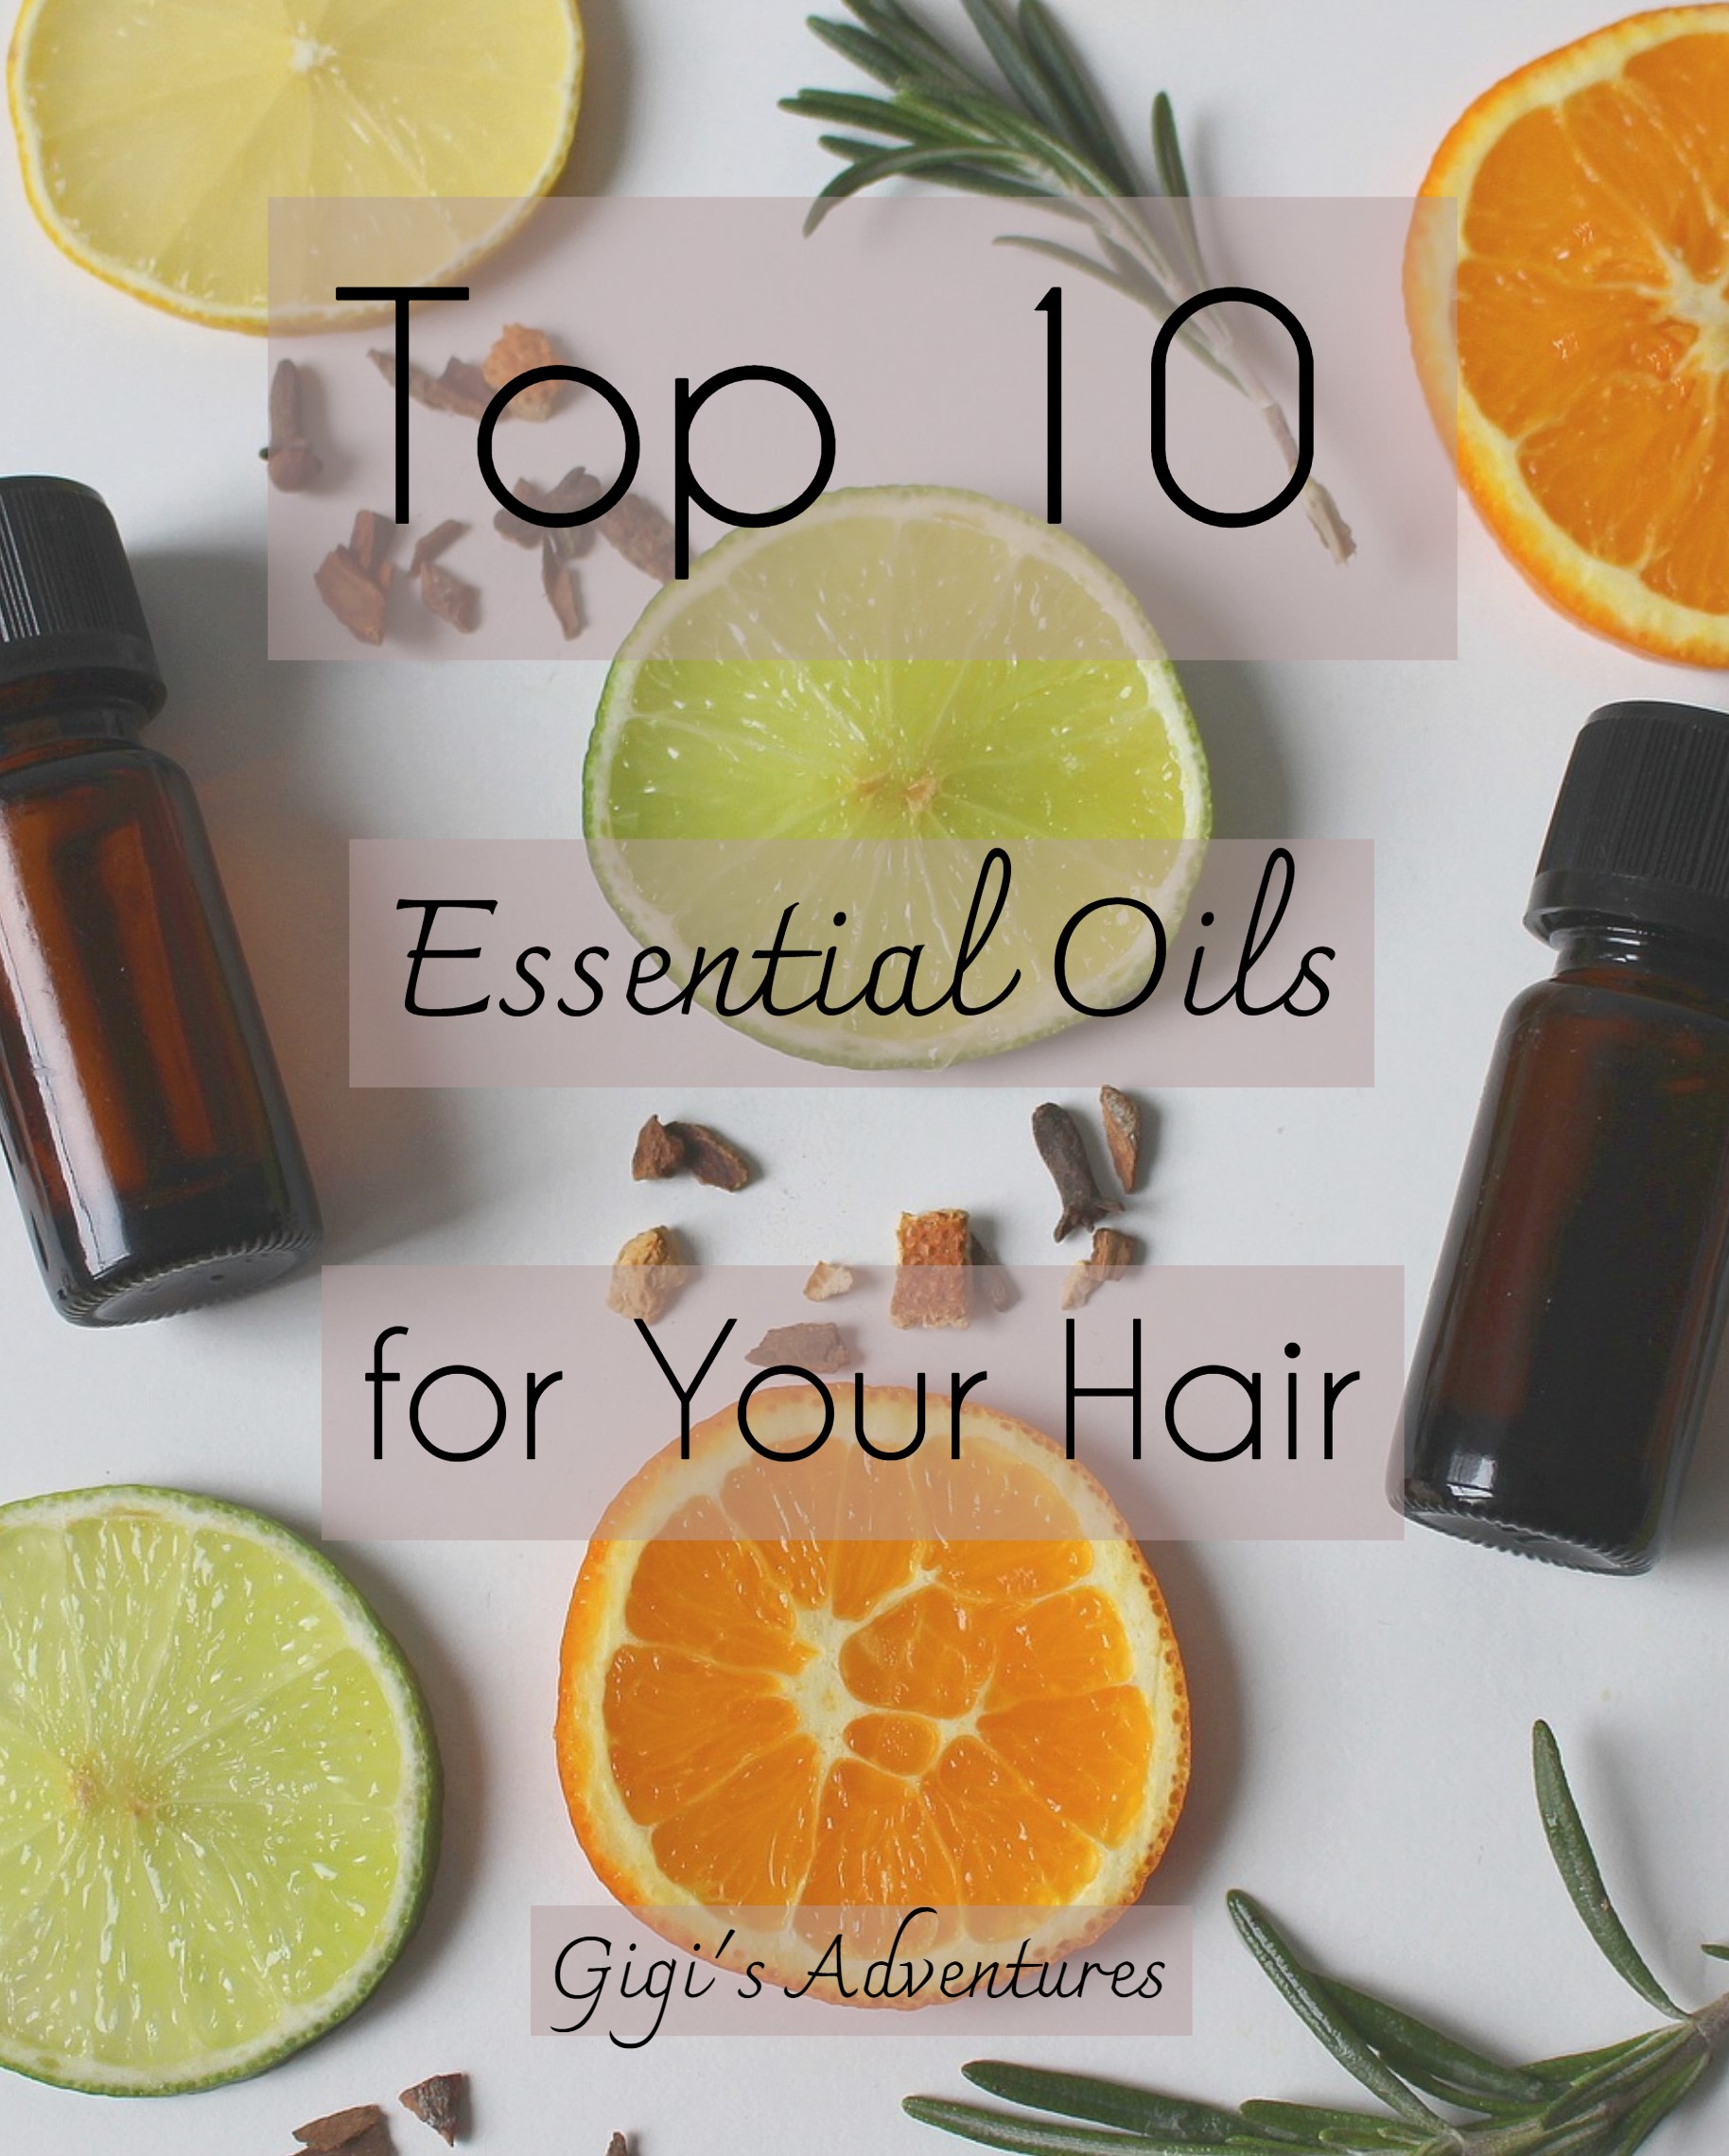 Top 10 Essential Oils for Hair | Shine, Growth and Much More!